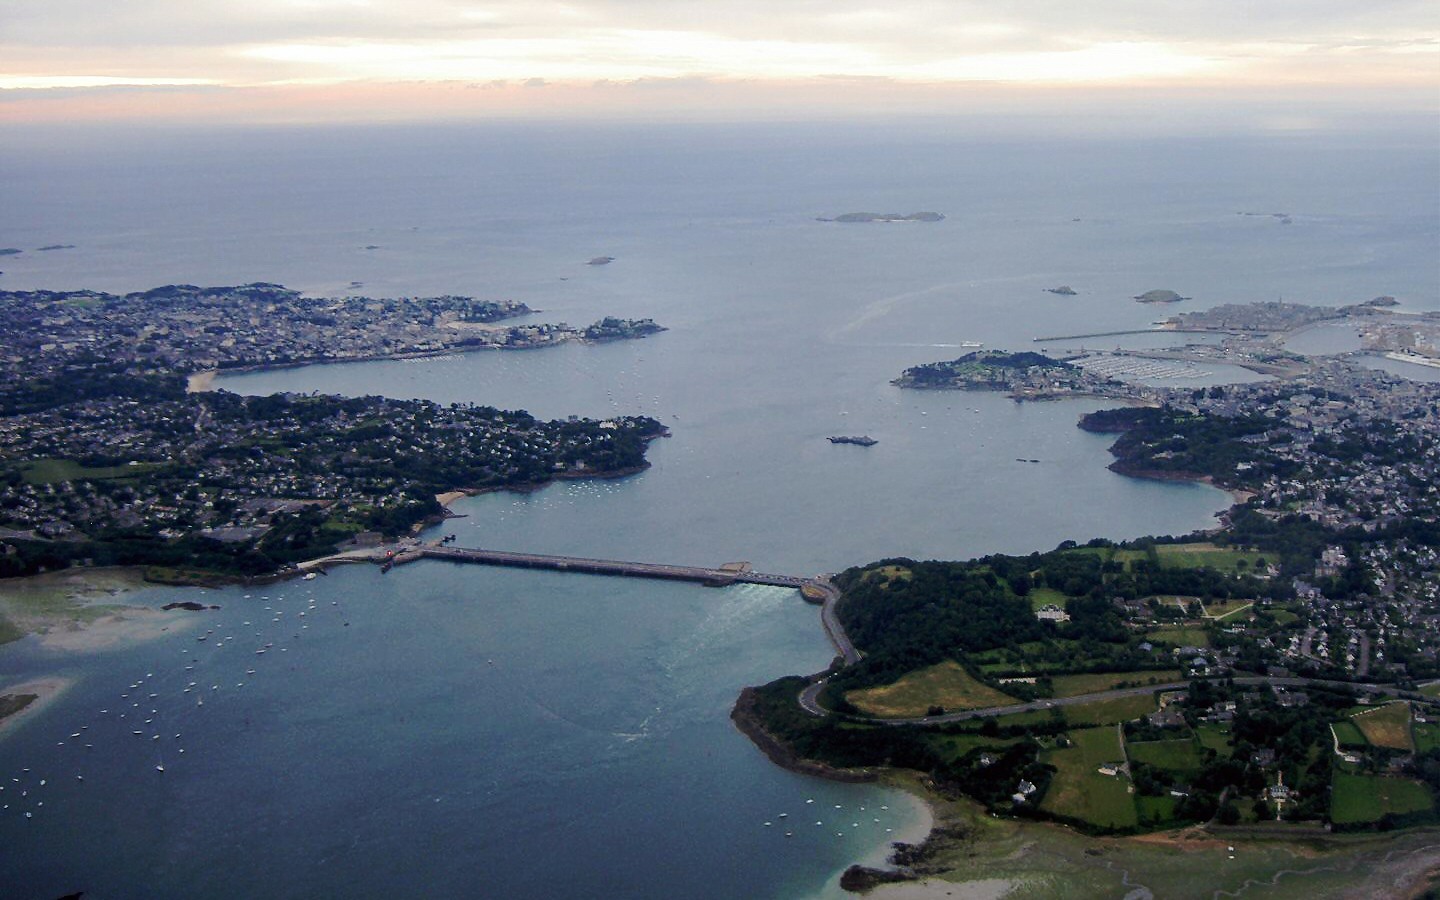 The Rance tidal barrage in France. By Tswgb - Own work, Public Domain, https://commons.wikimedia.org/w/index.php?curid=3182853